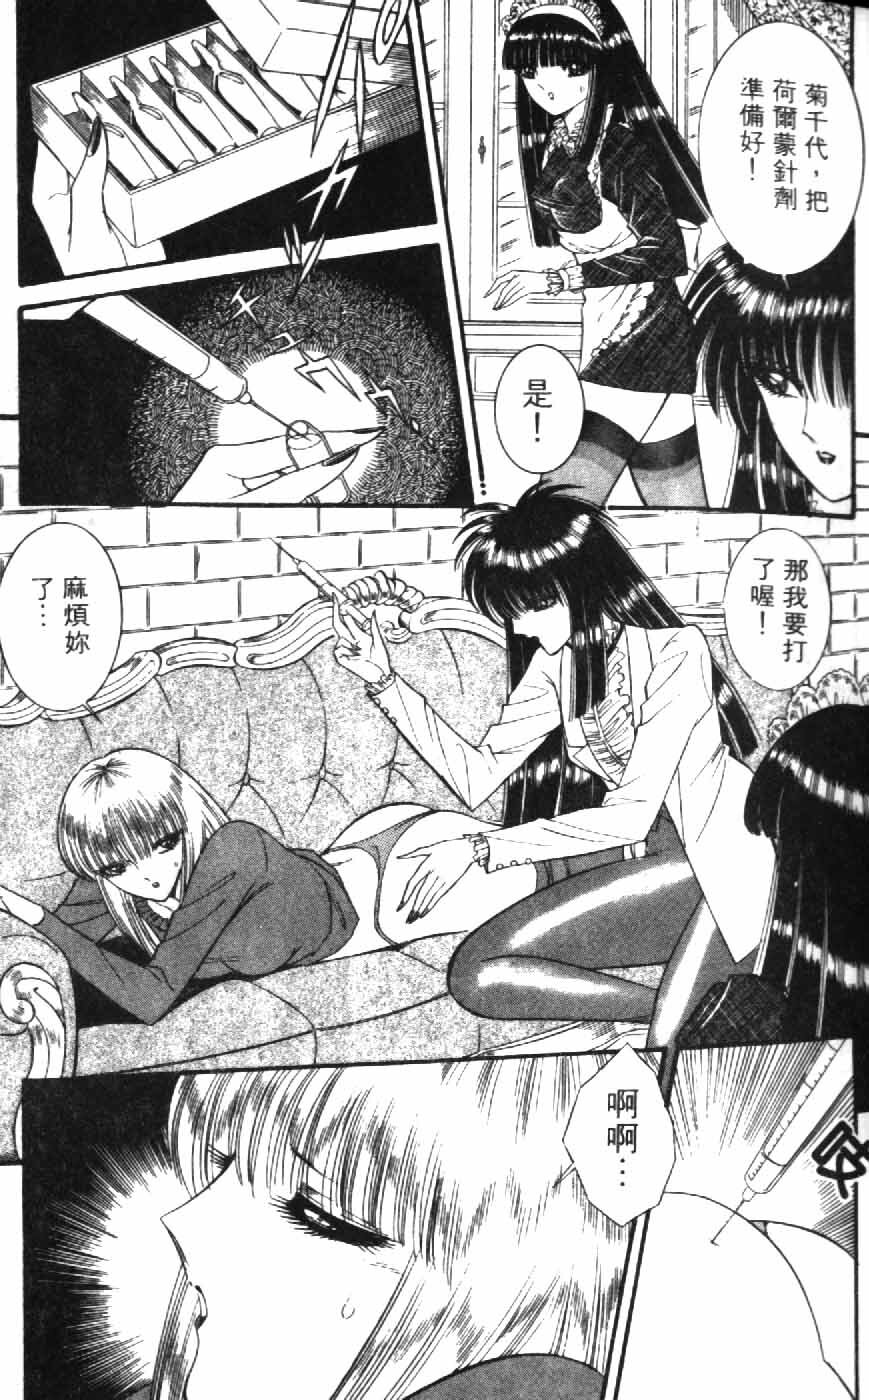 [Senno Knife] Ouma ga Horror Show 1 - Trans Sexual Special Show 1 | 顫慄博覽會 1 [Chinese] page 51 full